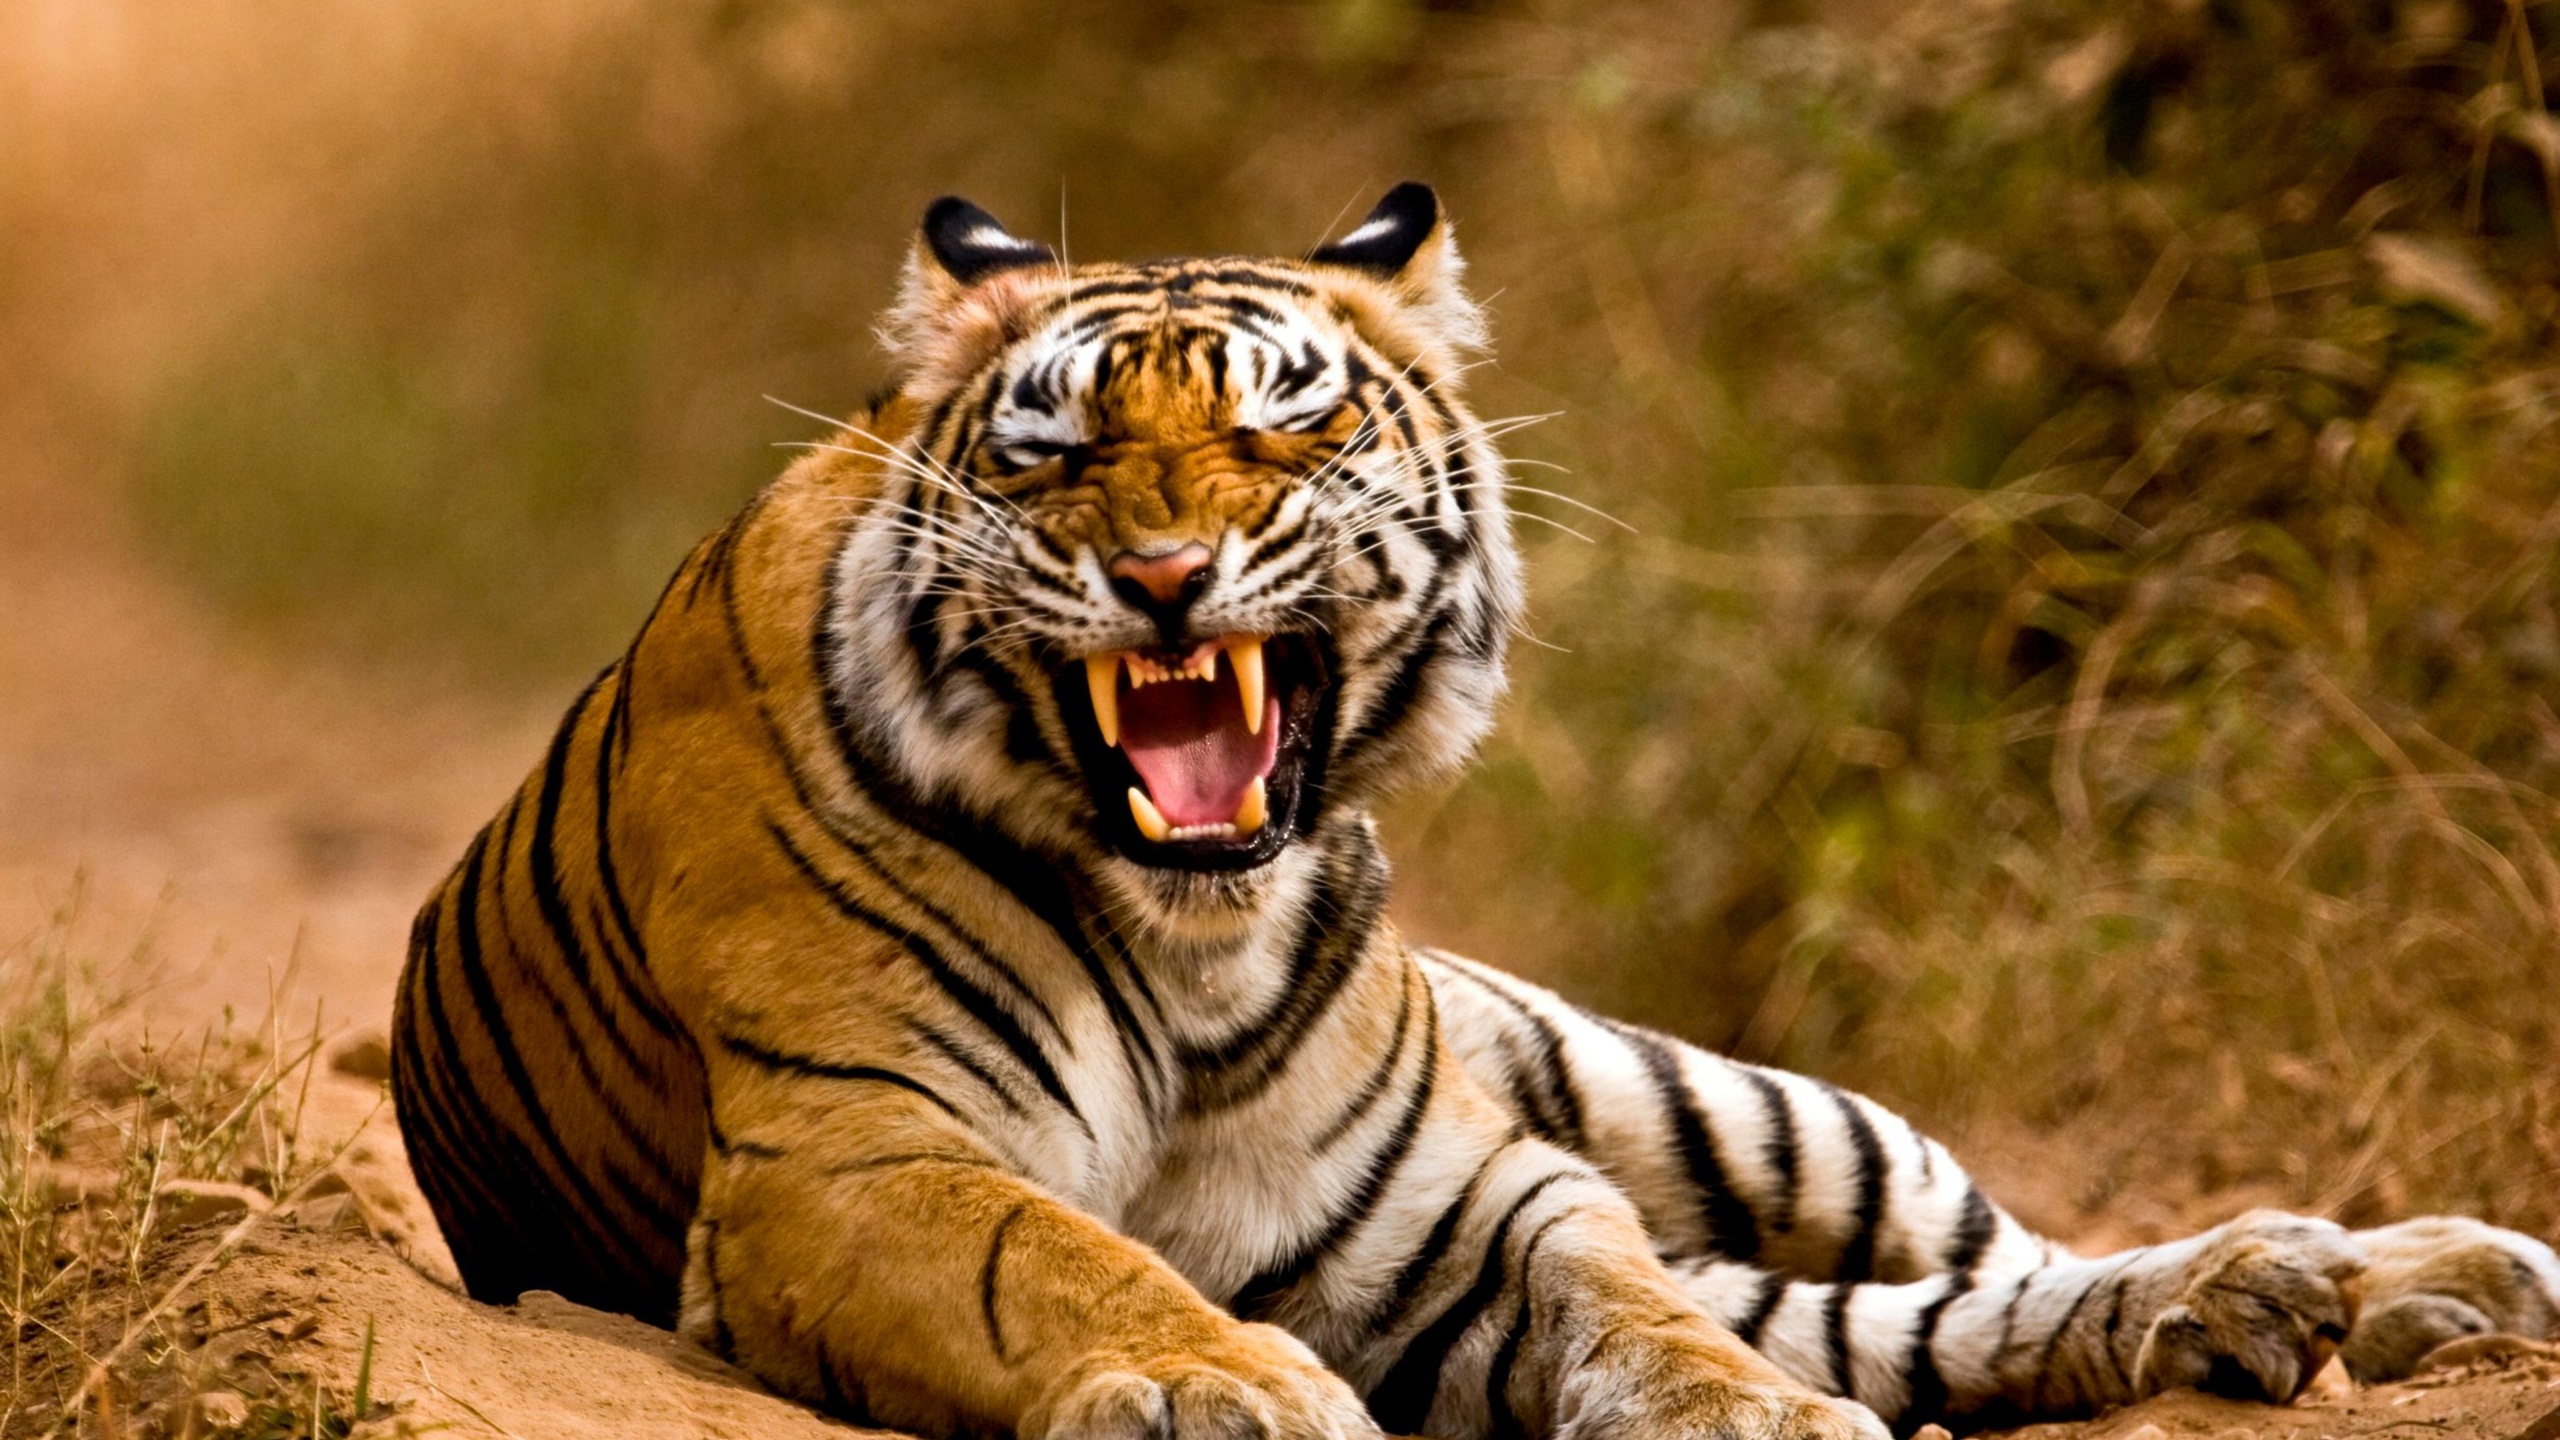 Angry Tiger Wallpaper - Angry Wallpaper Tiger Hd , HD Wallpaper & Backgrounds